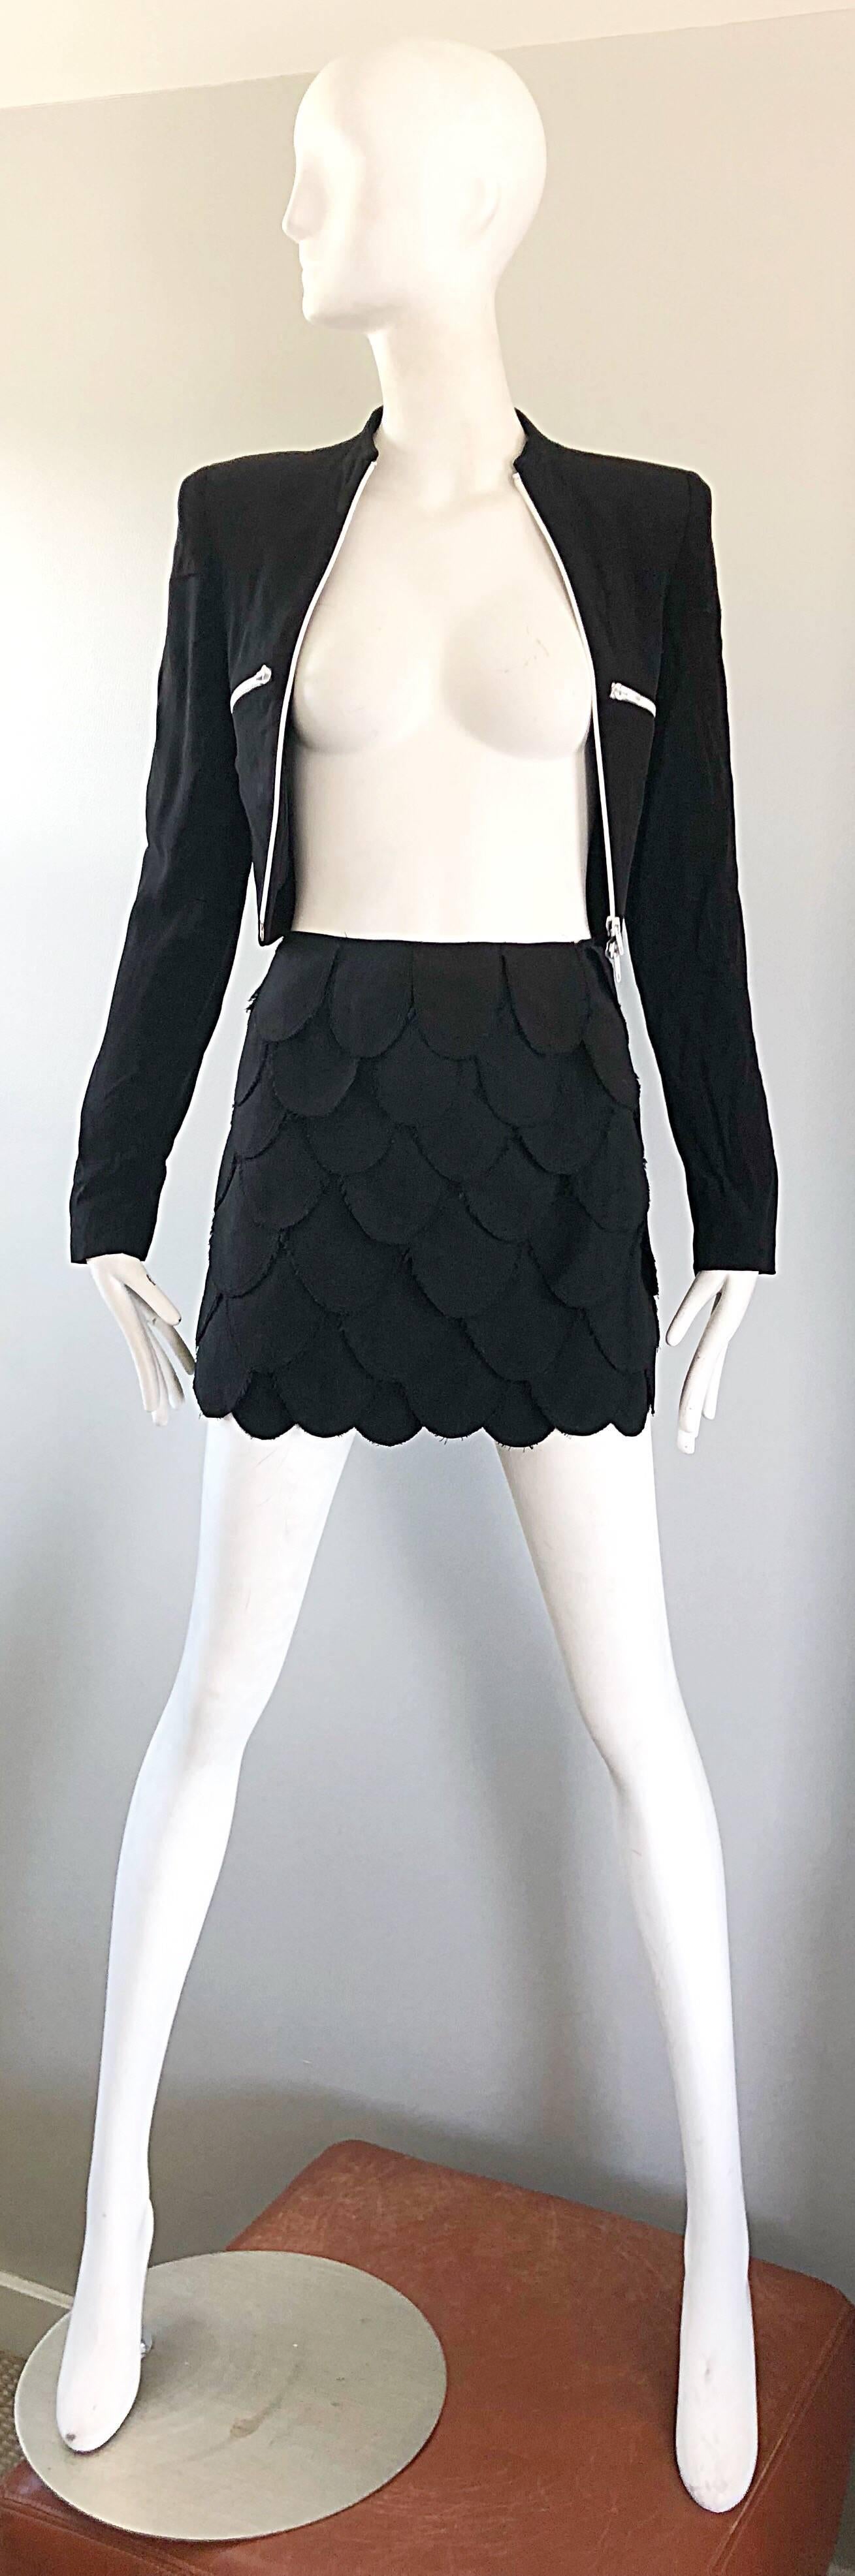 Sexy 1990s MOSCHINO CHEAP & CHIC black carwash petal fringed mini skirt! Features oval shaped panels throughout the entire front and back of the skirt. Hidden zipper up the side with hidden snap closures. The pictured 90s RIFAT FUTURE OZBEK cropped